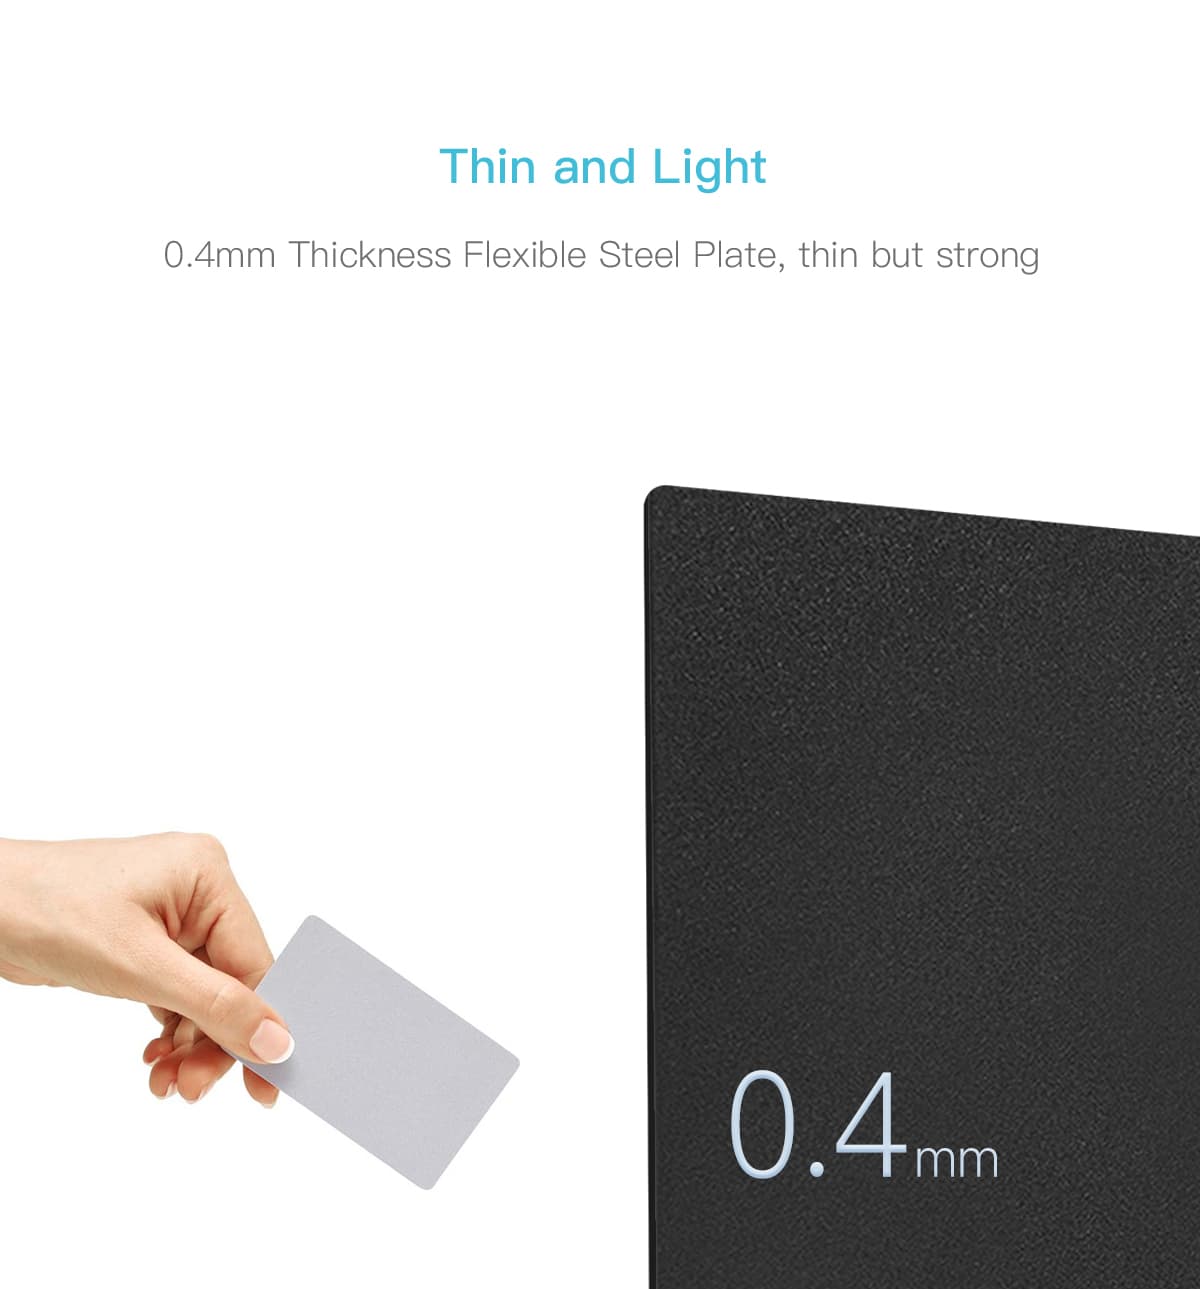 PEI Magnetic Flexible Plate is very thin and light.